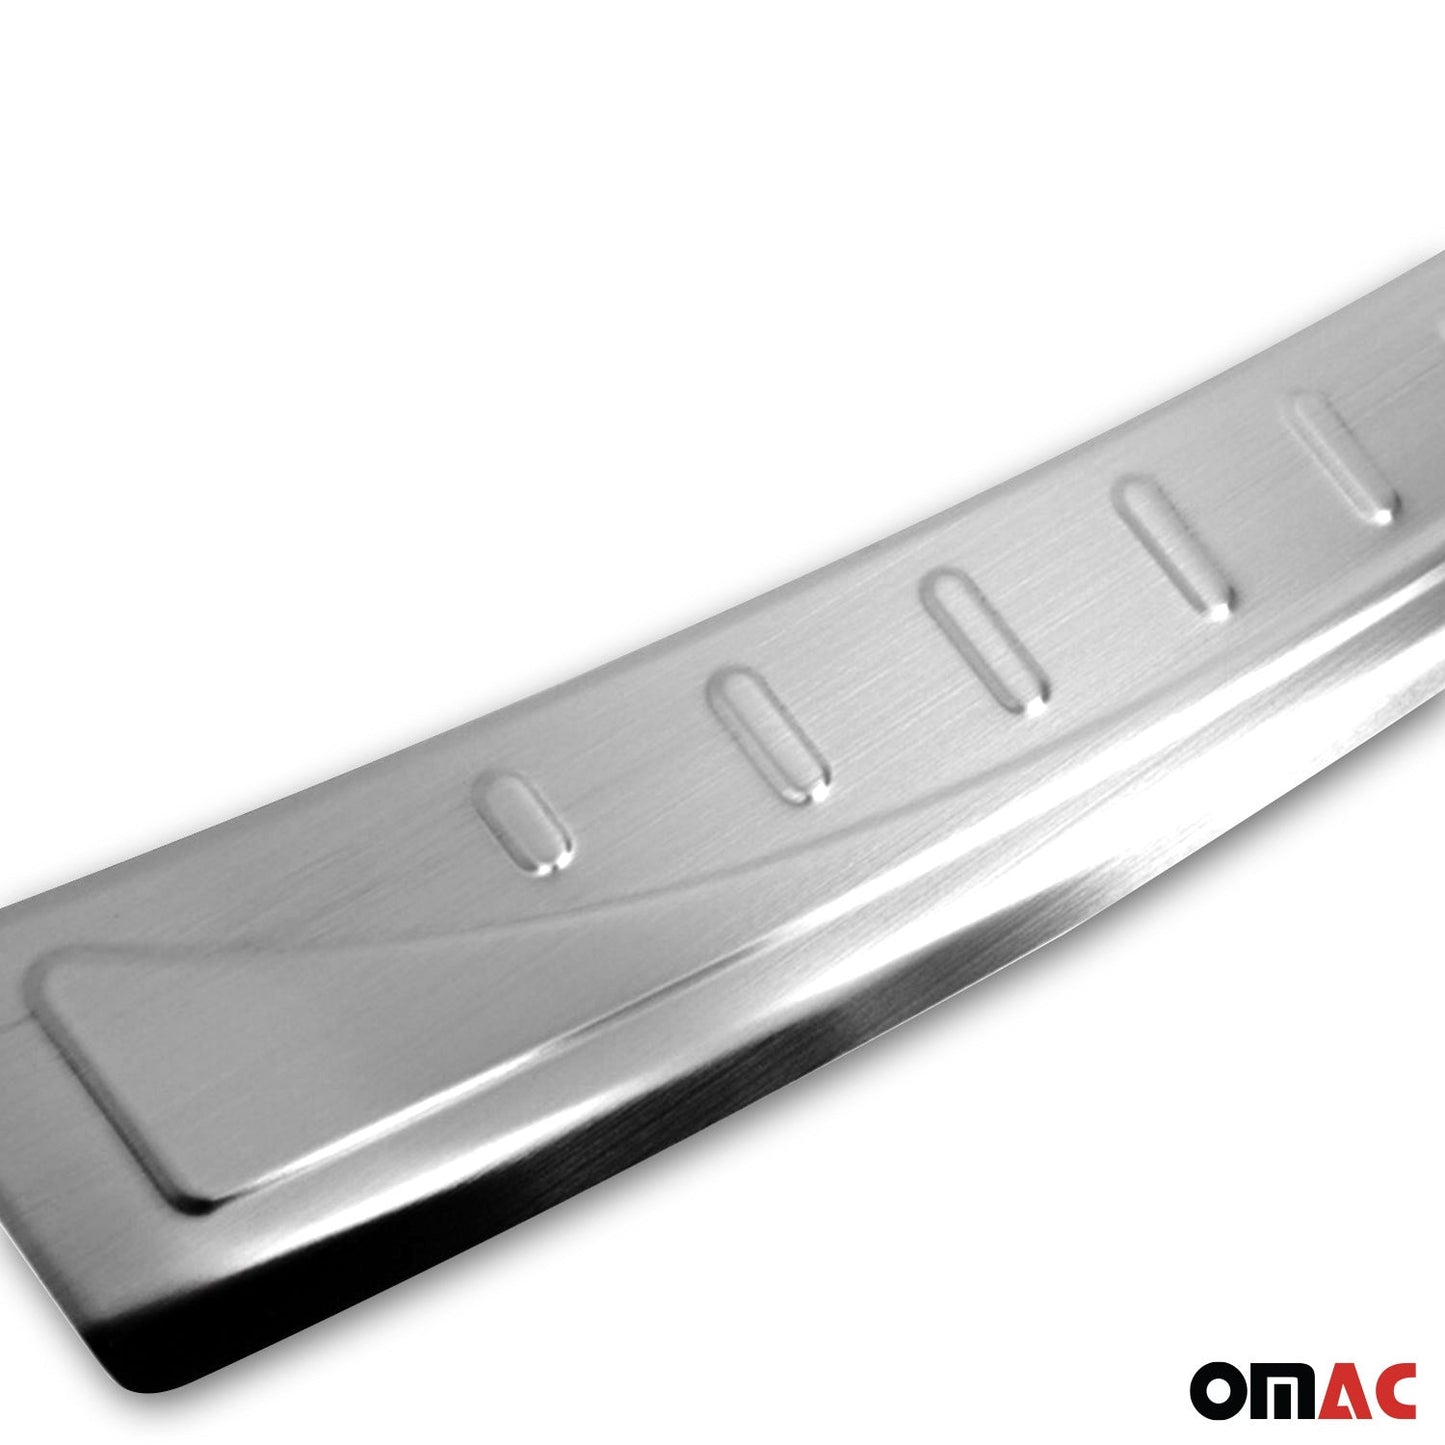 OMAC Rear Bumper Sill Cover Protector Guard for Seat Ateca 2016-2020 Brushed Steel K-6512093T